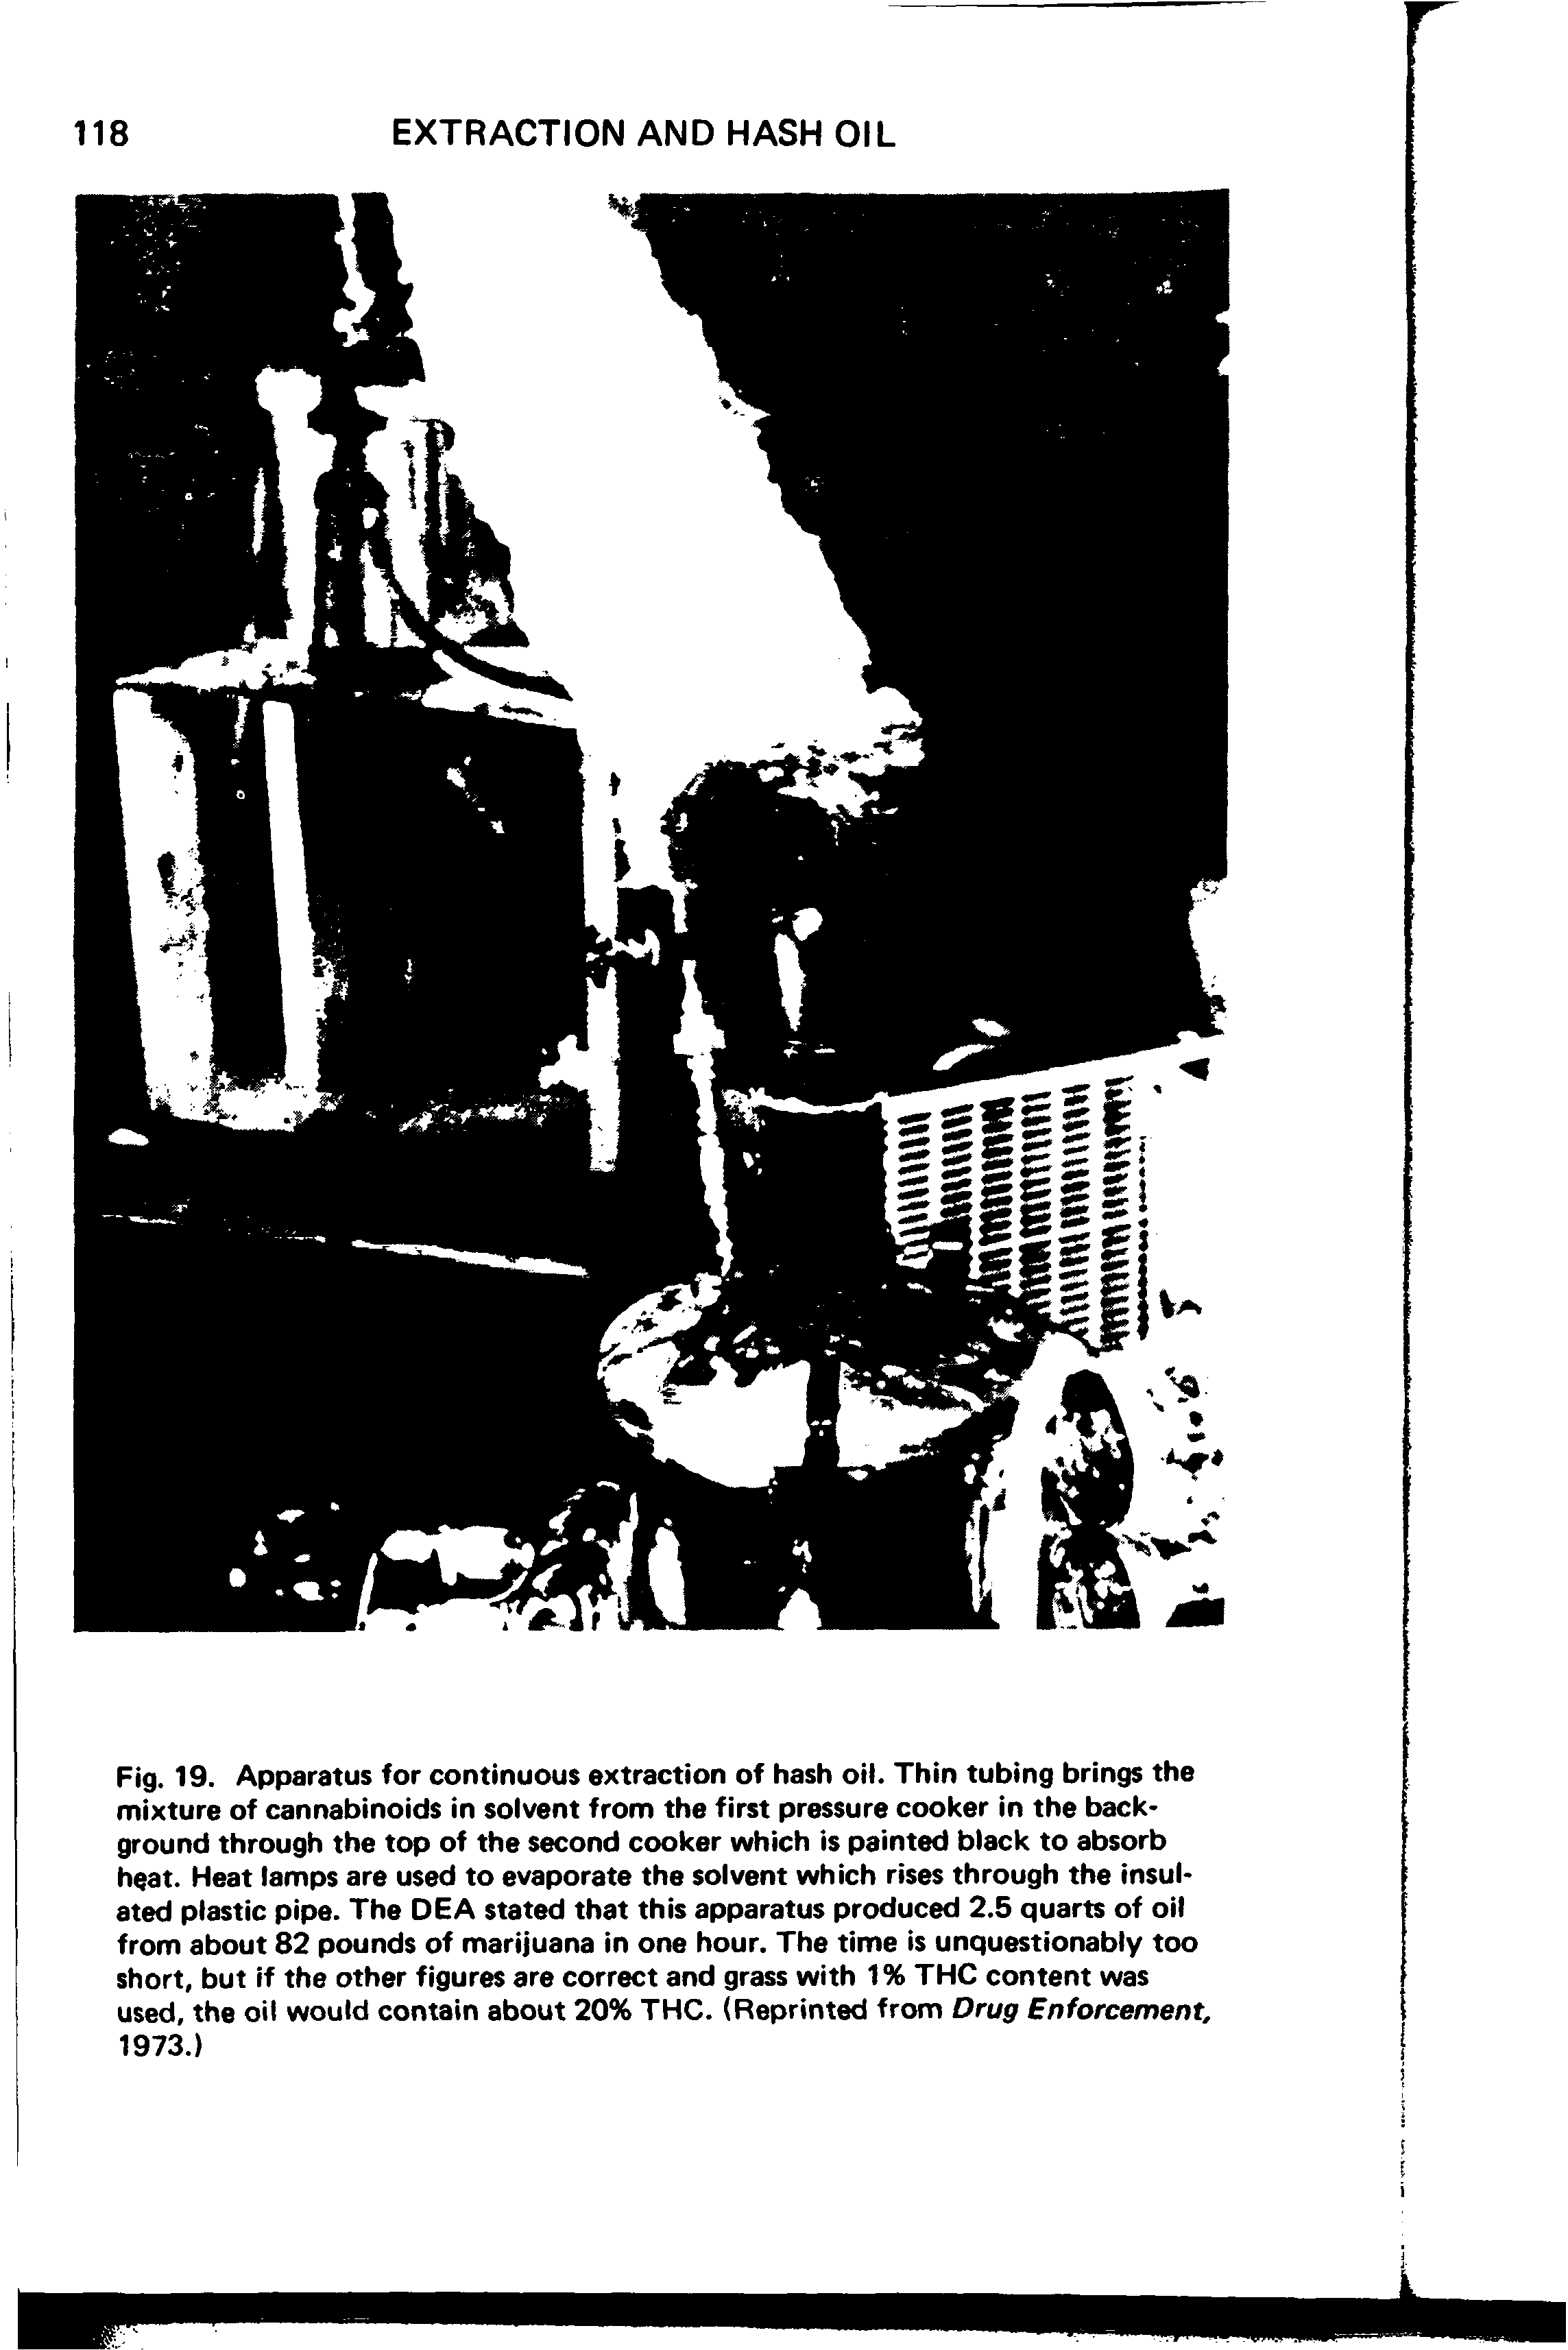 Fig. 19. Apparatus for continuous extraction of hash oil. Thin tubing brings the mixture of cannabinoids in solvent from the first pressure cooker in the background through the top of the second cooker which is painted black to absorb heat. Heat lamps are used to evaporate the solvent which rises through the insulated plastic pipe. The DEA stated that this apparatus produced 2.5 quarts of oil from about 82 pounds of marijuana in one hour. The time is unquestionably too short, but if the other figures are correct and grass with 1% THC content was used, the oil would contain about 20% THC. (Reprinted from Drug Enforcement, 1973.)...